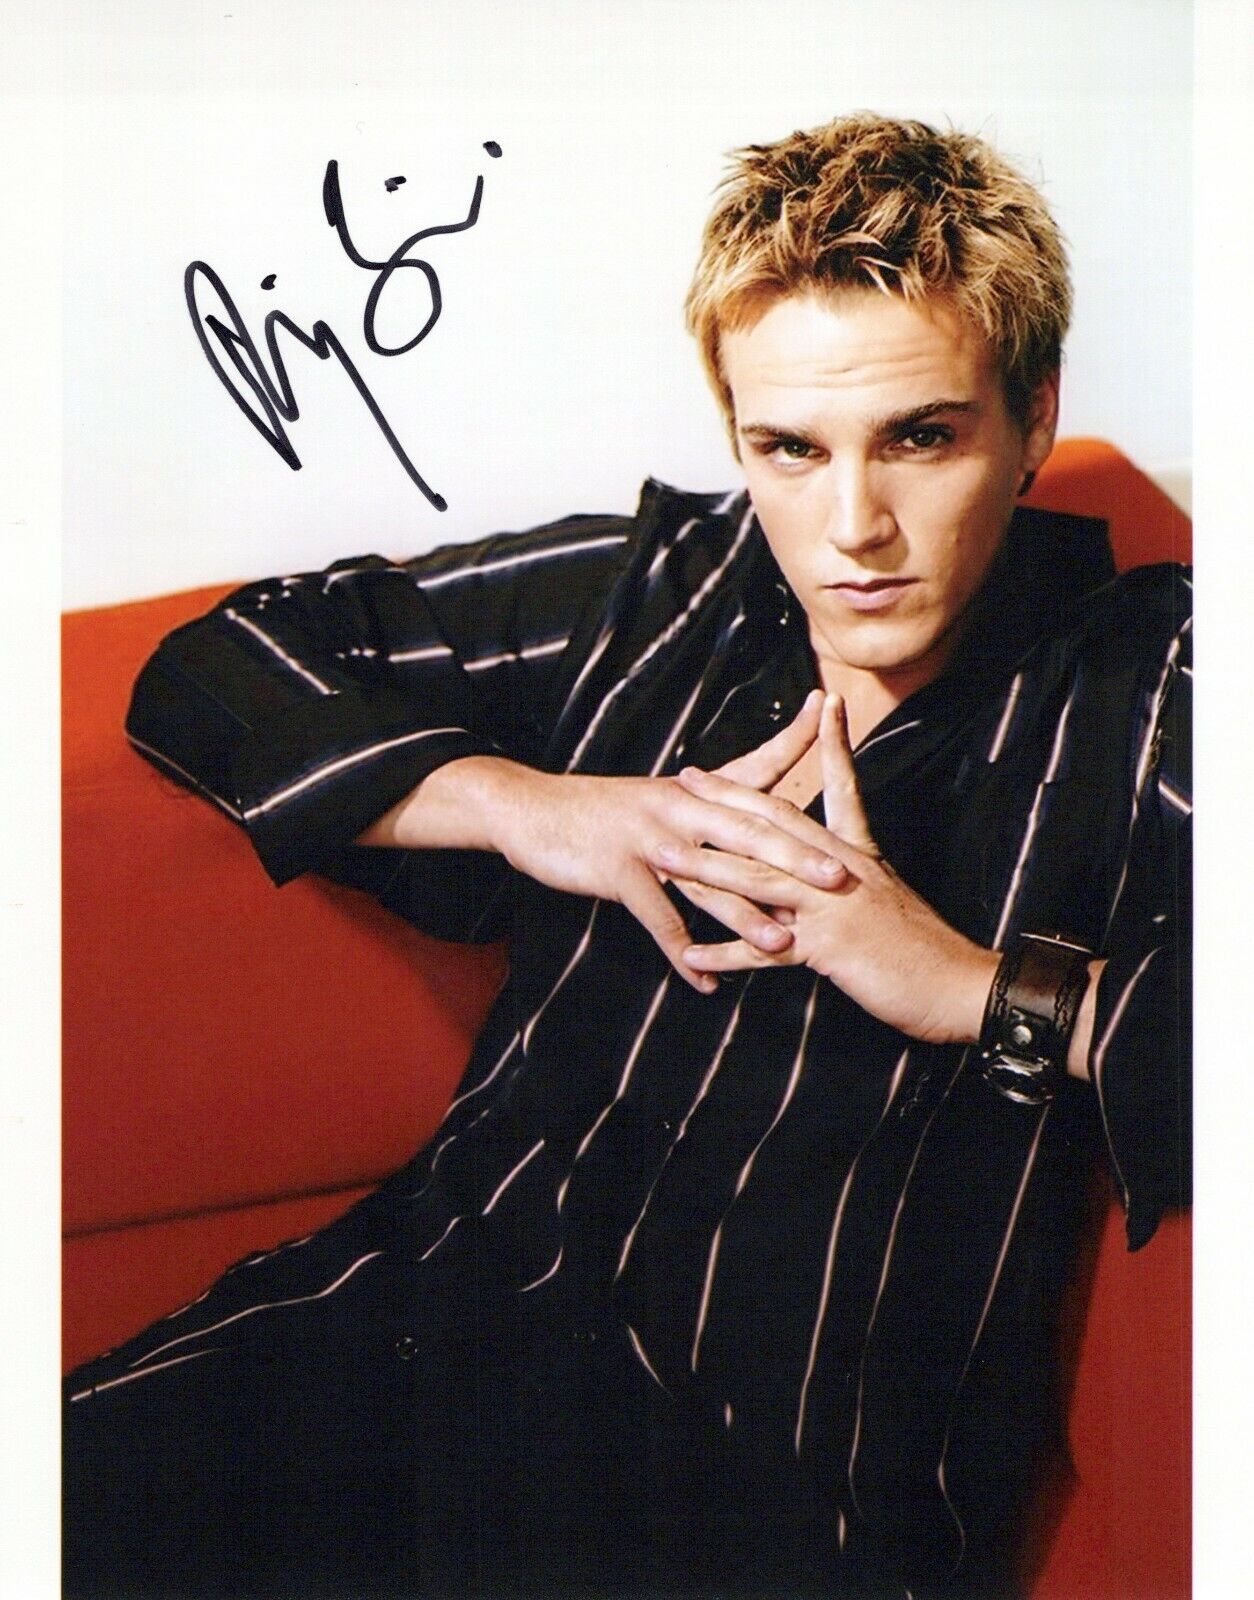 Riley Smith head shot autographed Photo Poster painting signed 8x10 #18